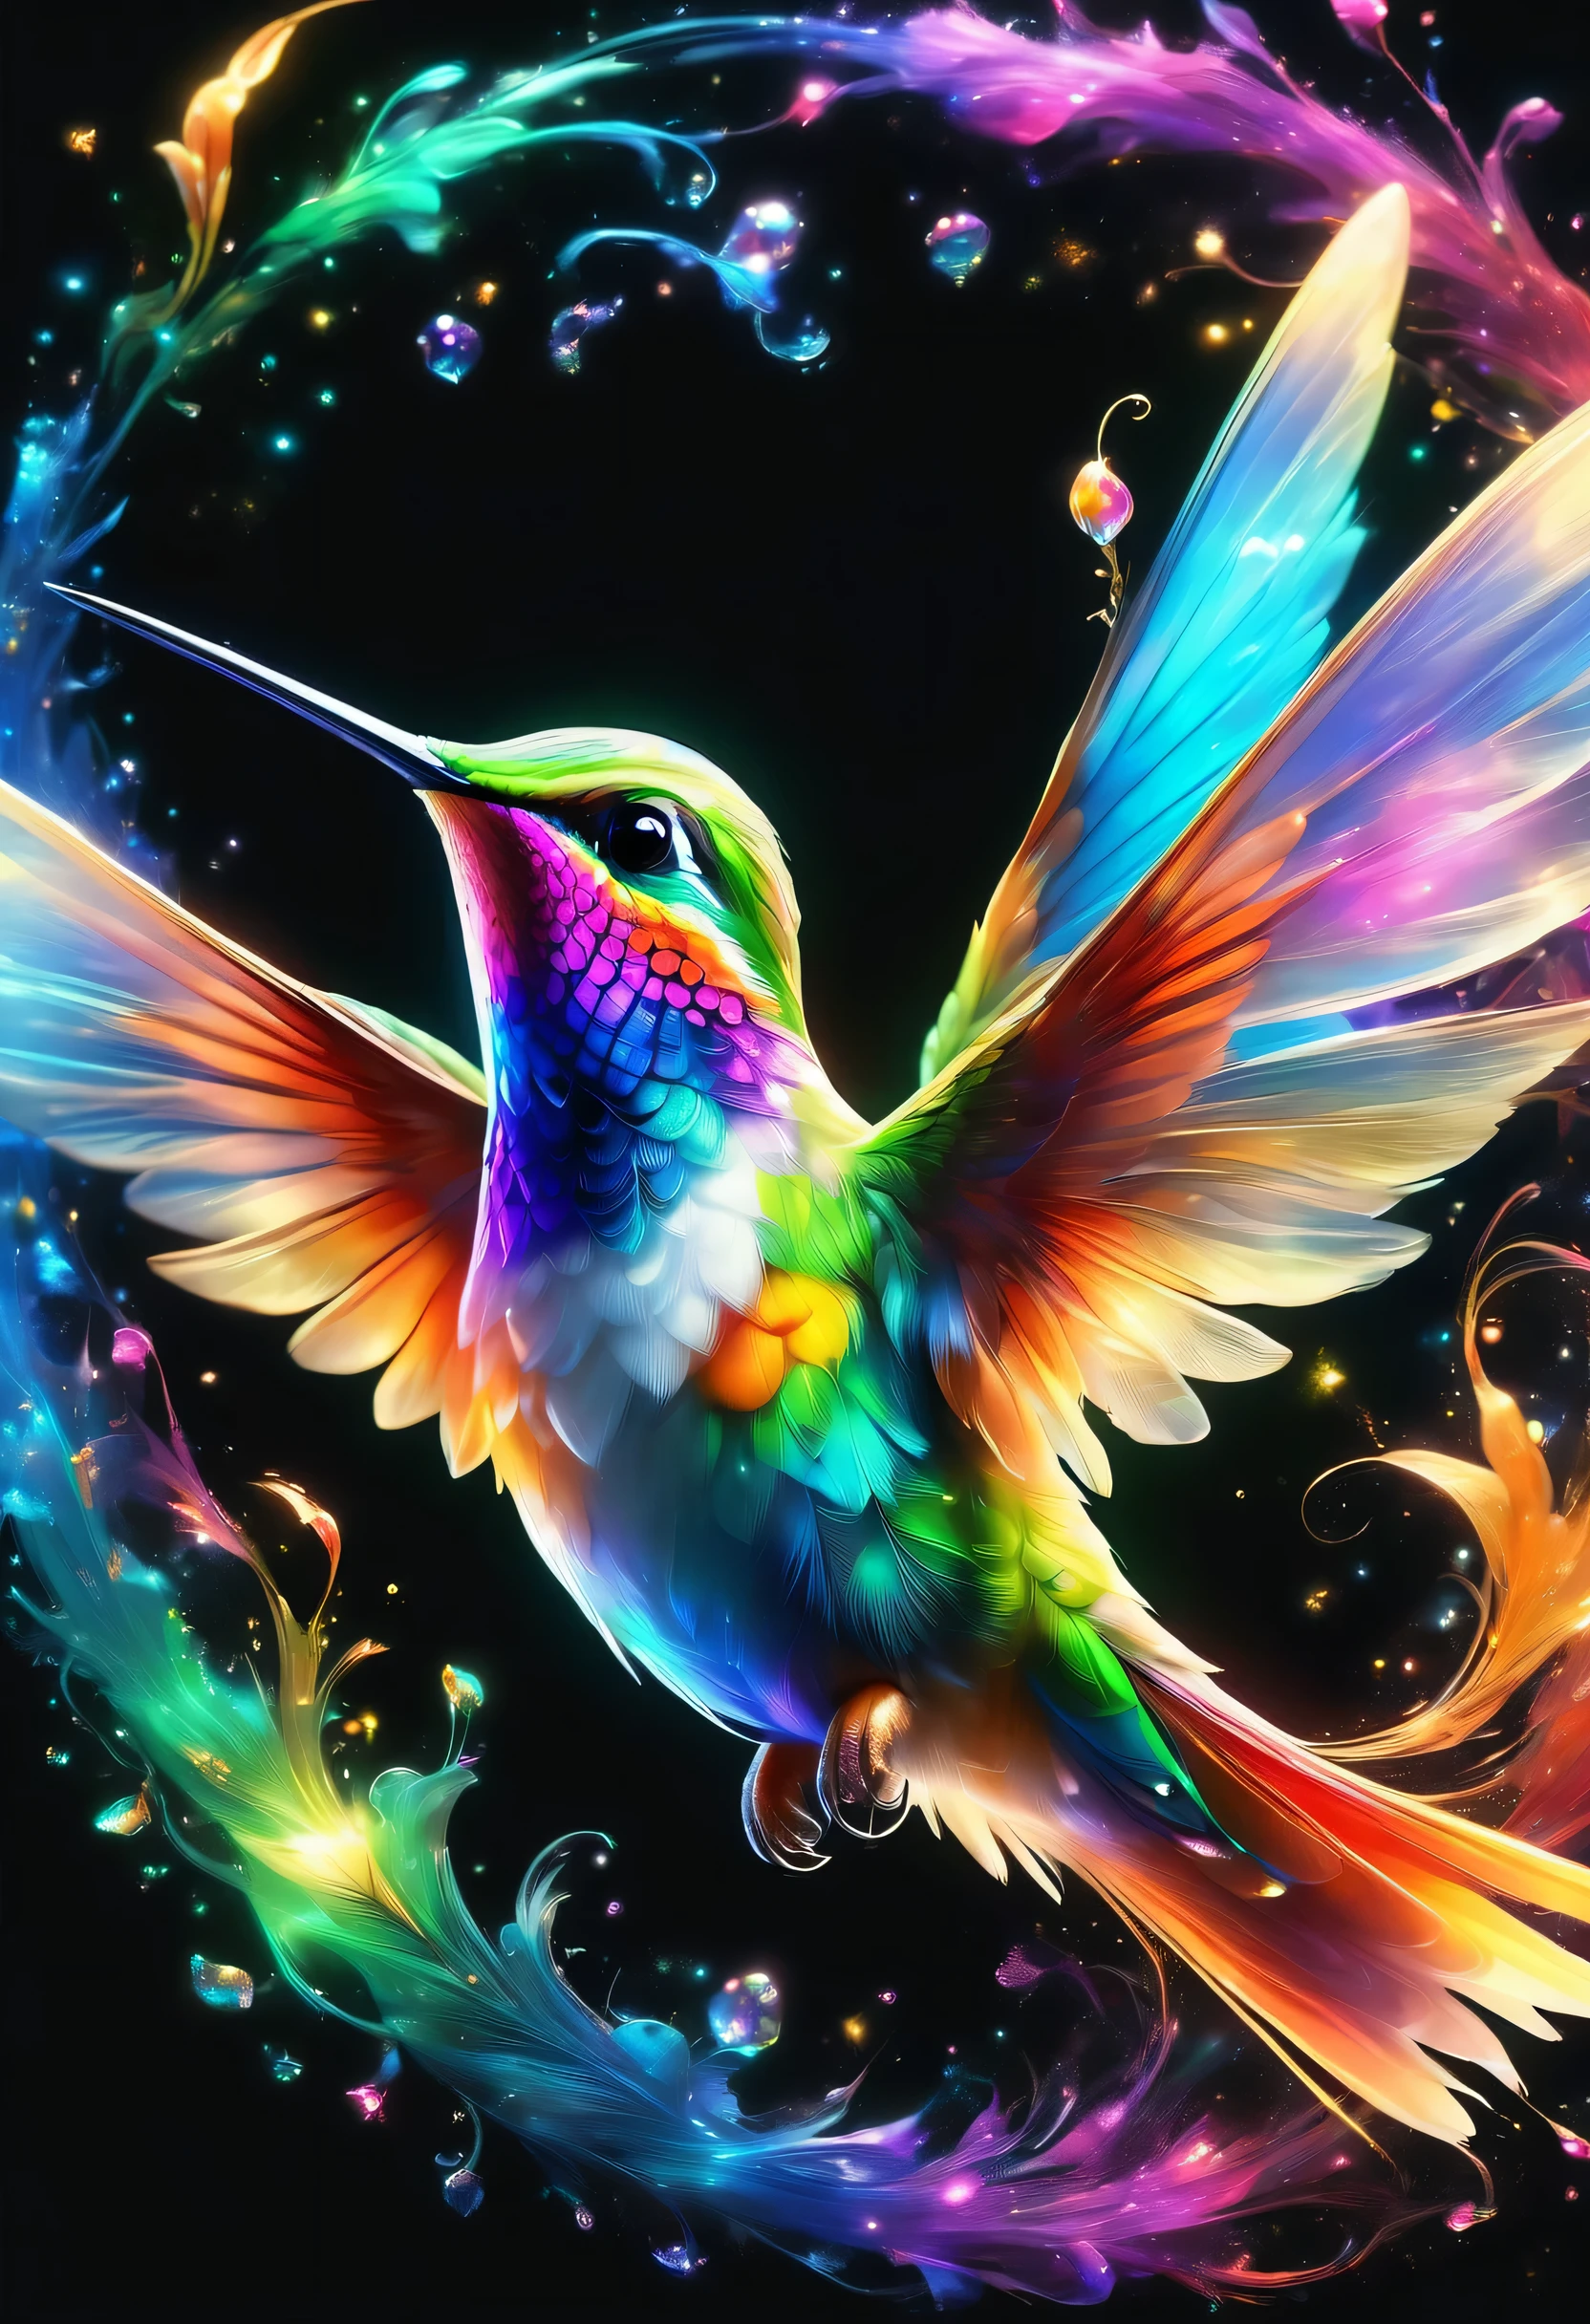 hummingbird isolated in black background,What a beautiful hummingbird,adorable,small,cute,very beautiful,rendering,realism,dream-like,magic essence,rich colors,Cast colorful spells,masterpiece,最高masterpiece,highest quality,8k,be familiar withなディティール,In detail,flash,とてもflash,reflection,Vibrant colors,be familiar with,delicately